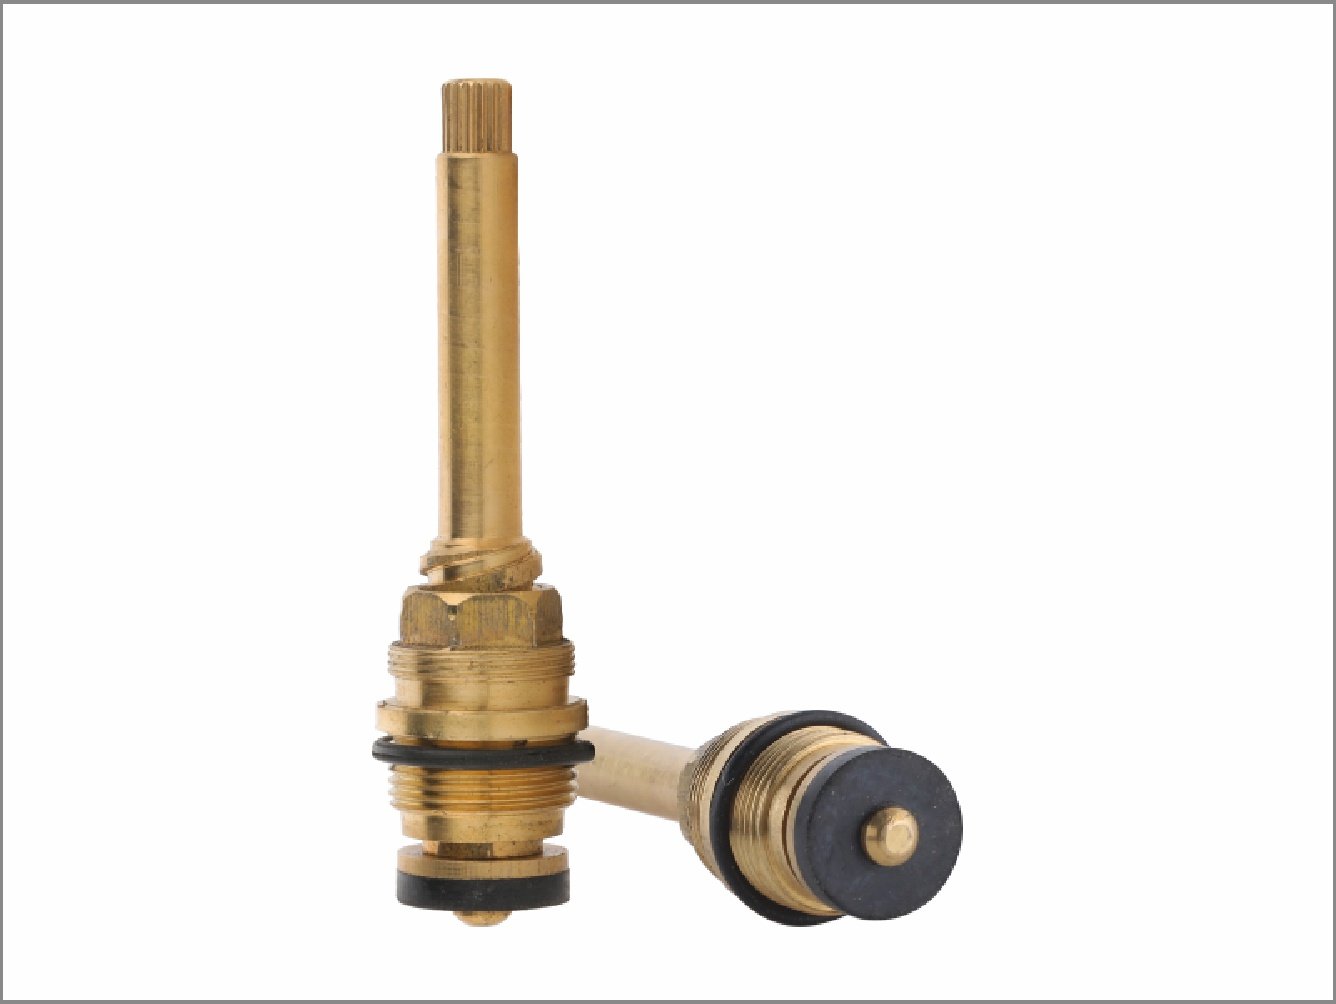 ACC-1023 - 3/4 Flush Spindle at Chesta Bath Fittings